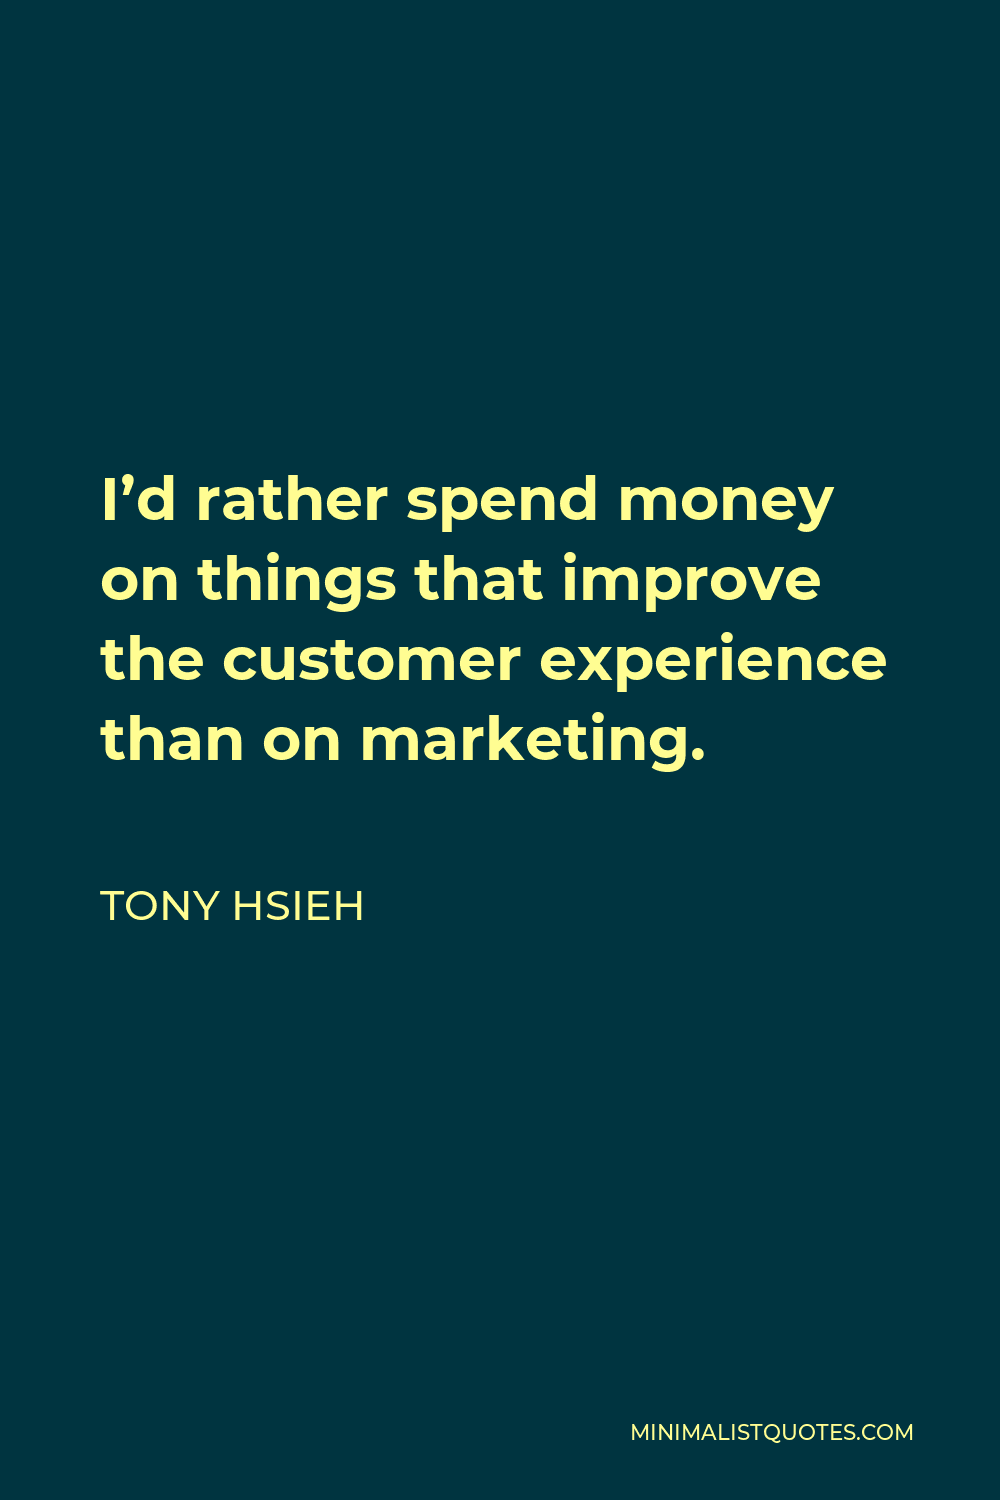 Tony Hsieh Quote - I’d rather spend money on things that improve the customer experience than on marketing.